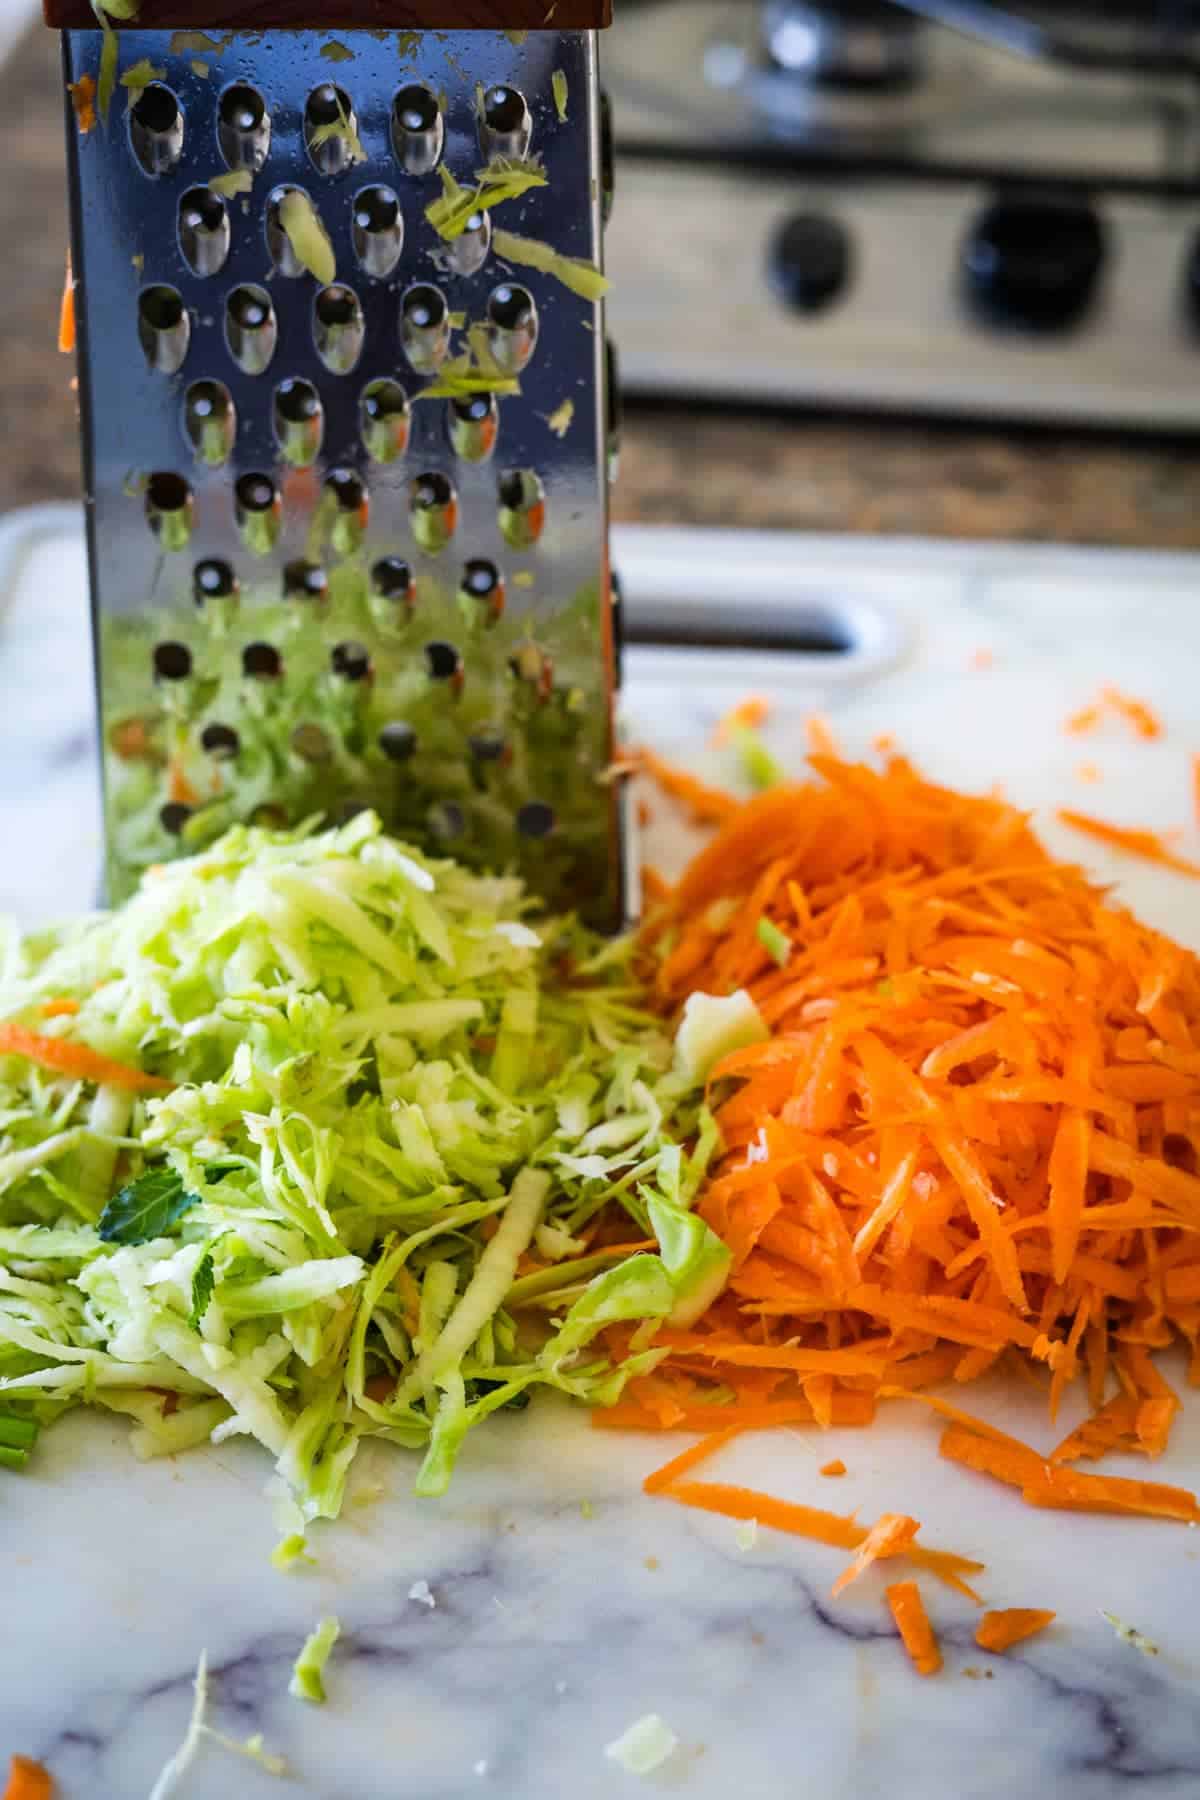 A grater on a cutting board with carrots and coleslaw.